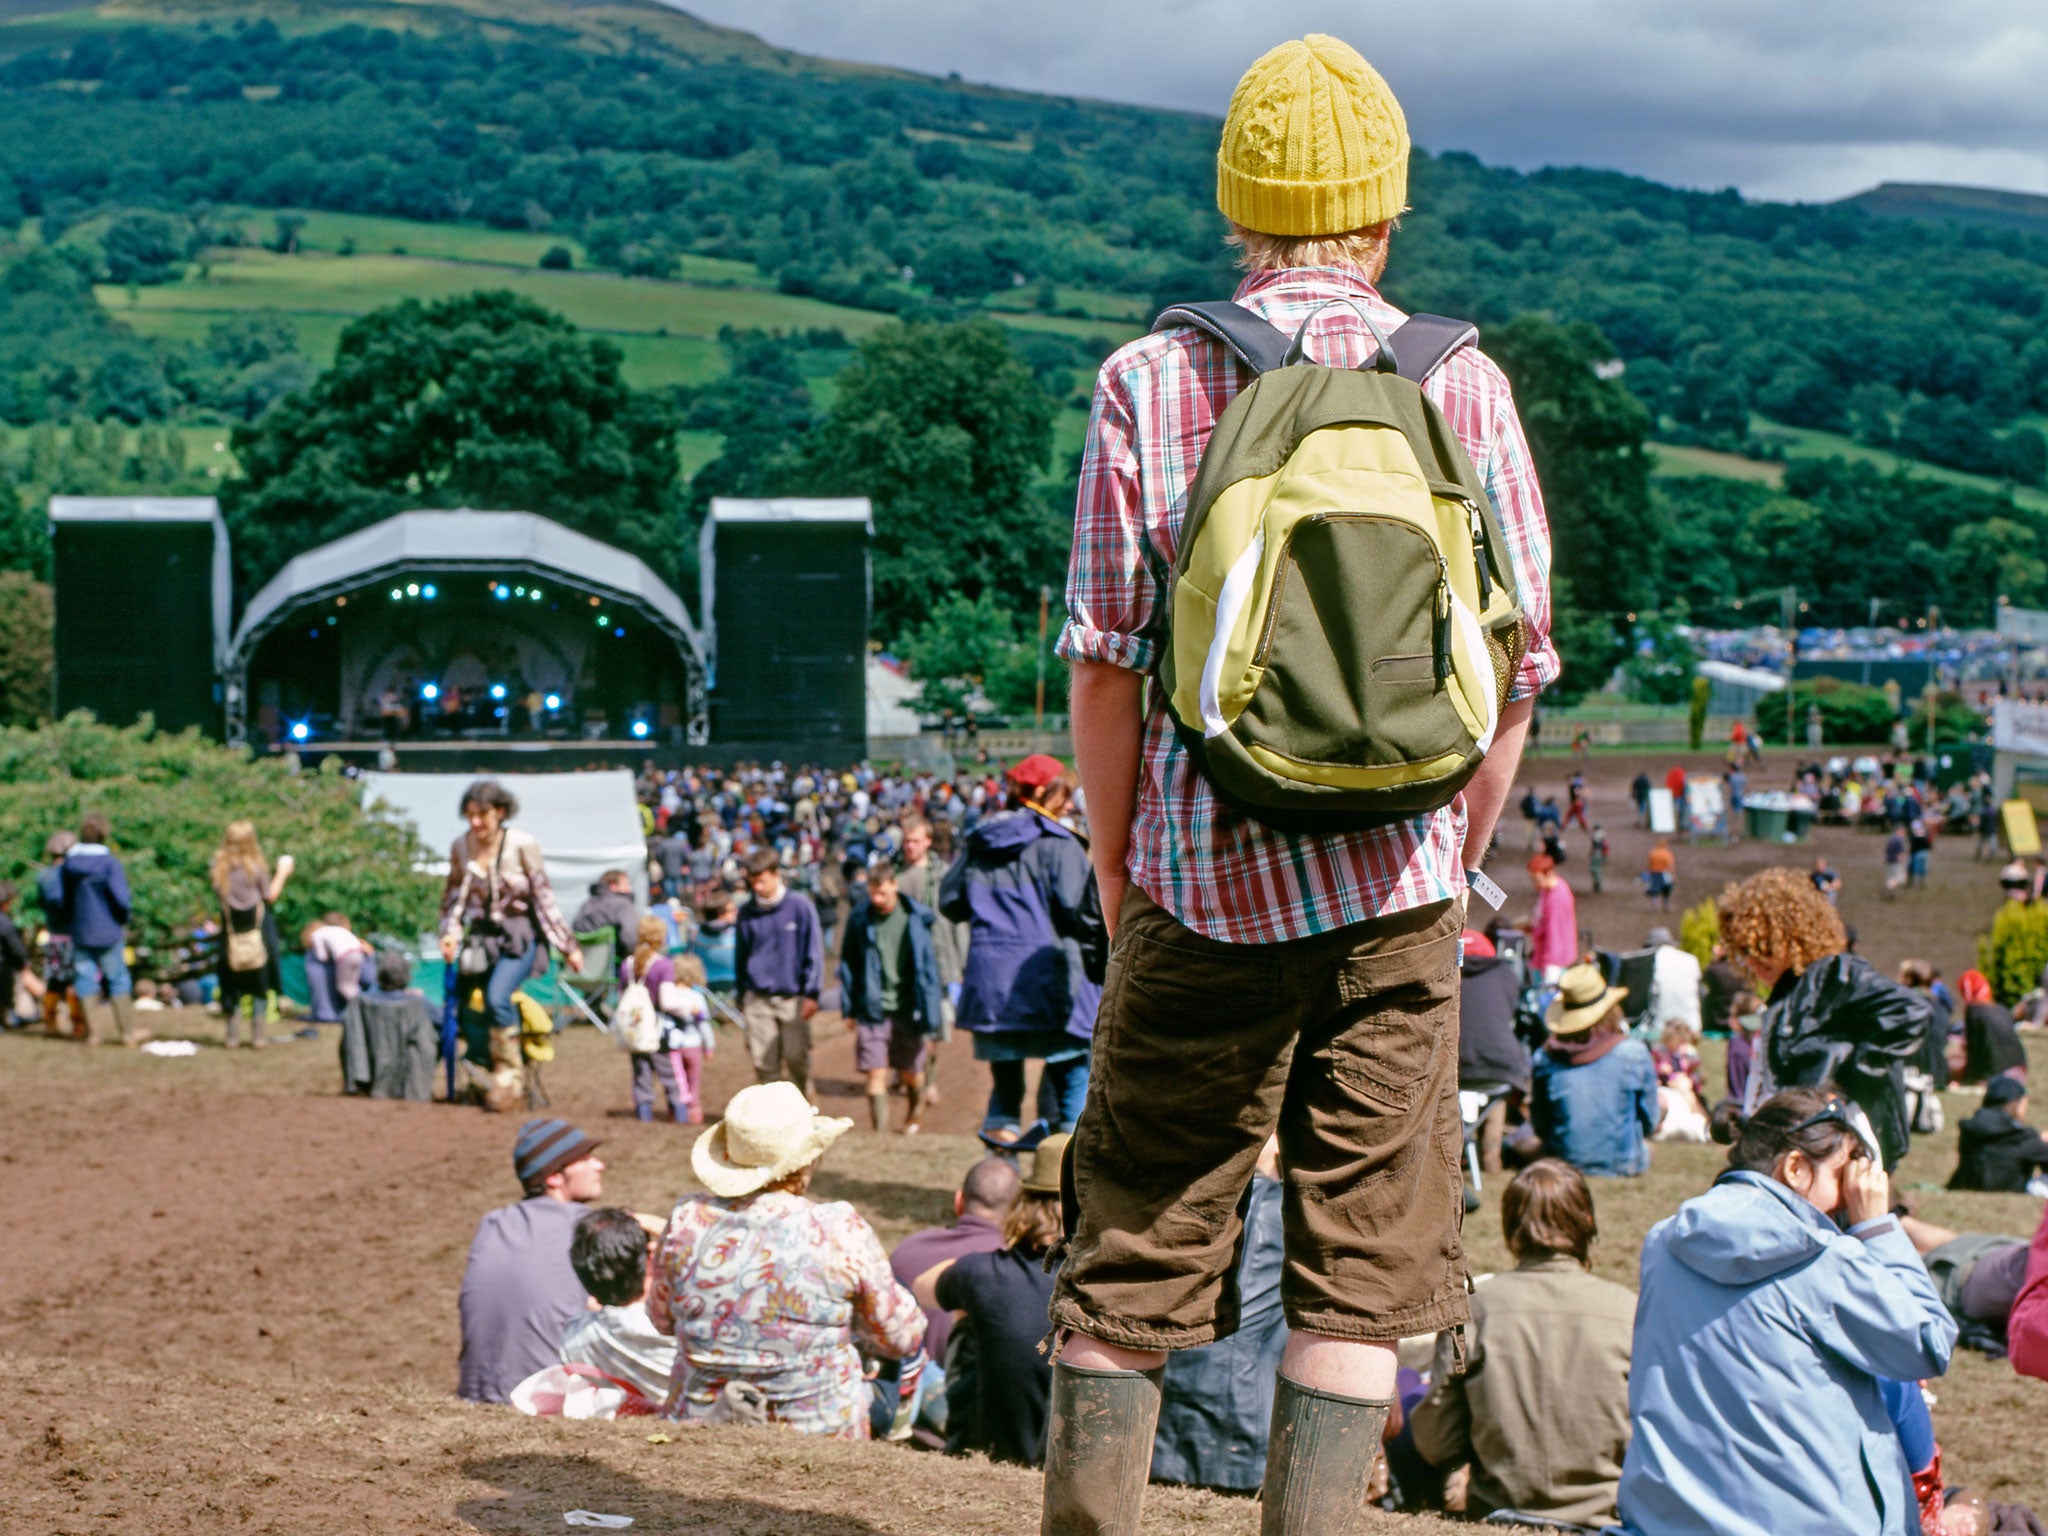 Take in the music and the gorgeous scenery at Green Man in Wales